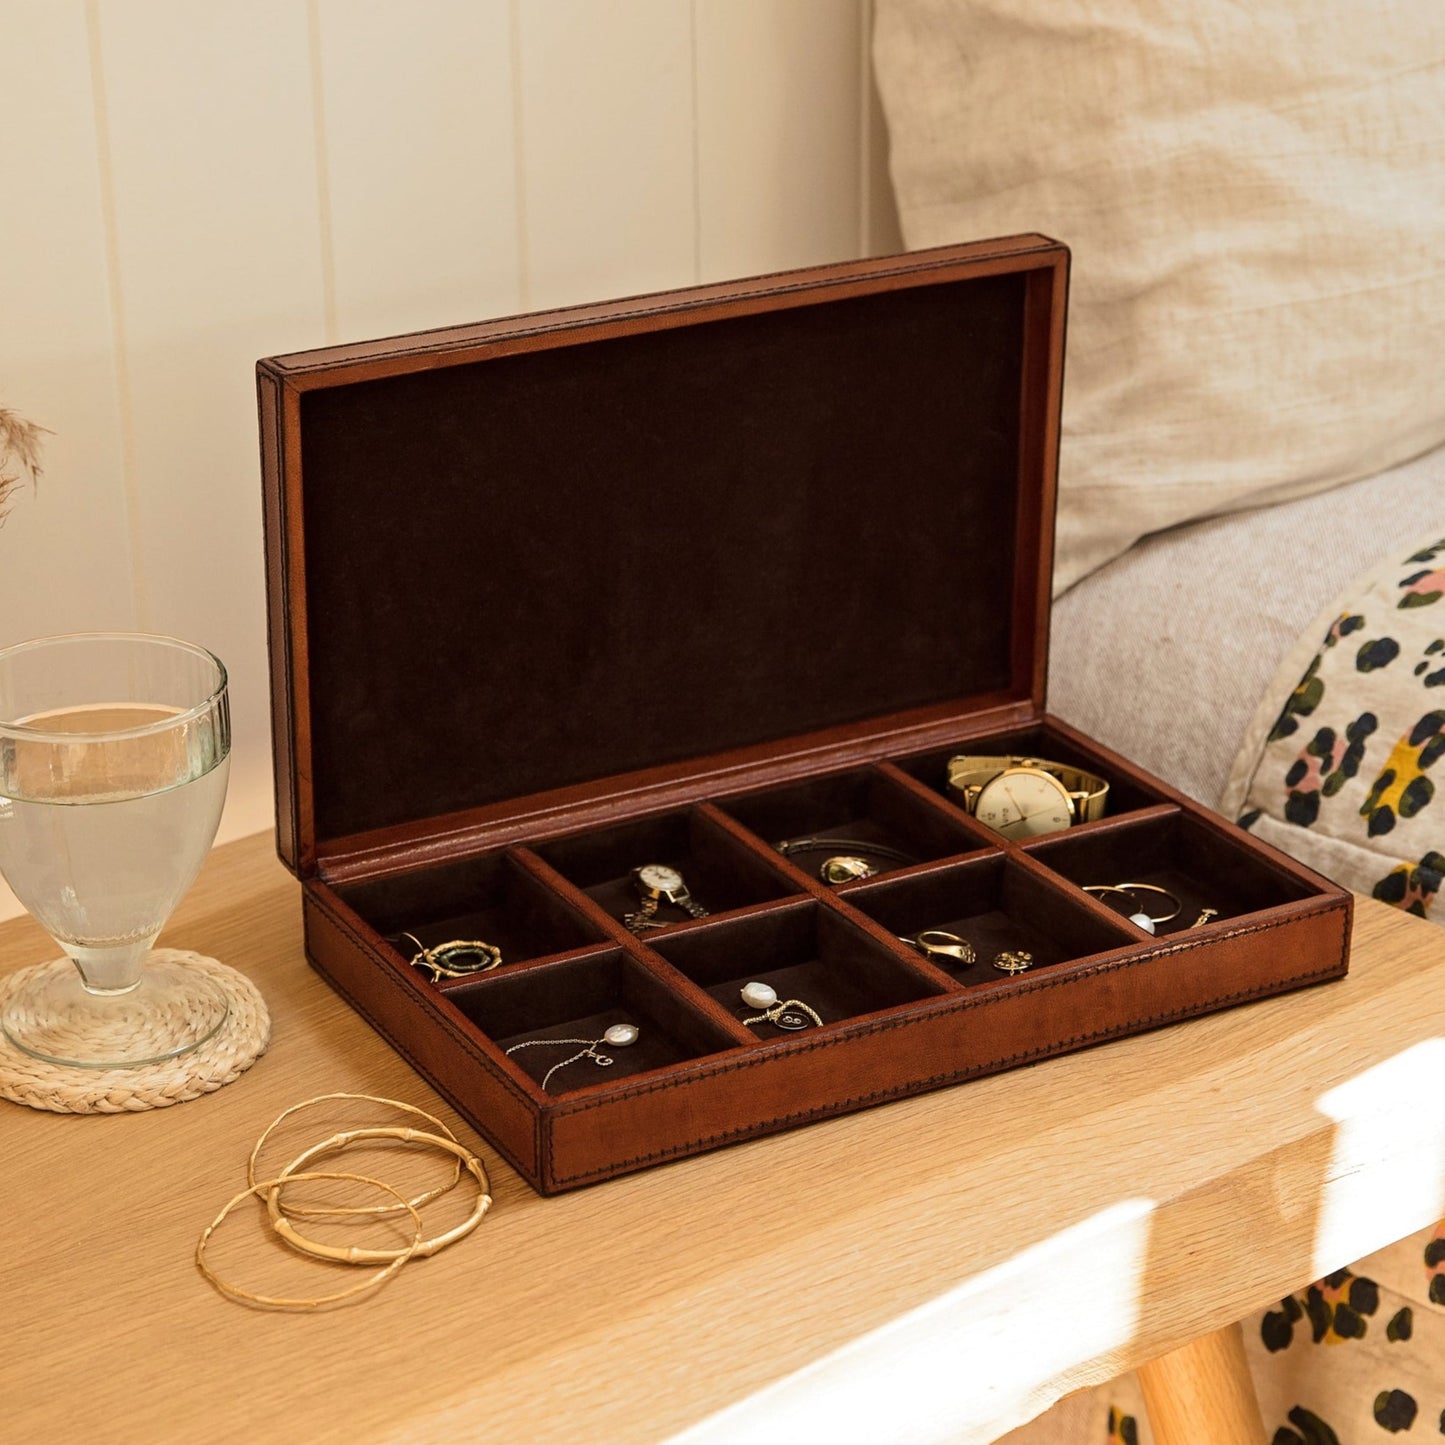 Rectangular flat jewellery box in tan leather, with 8 small compartments to hold a collection of rings, necklaces or bracelets. Personalise with their name or the contents as a timeless gift for an anniversary. 